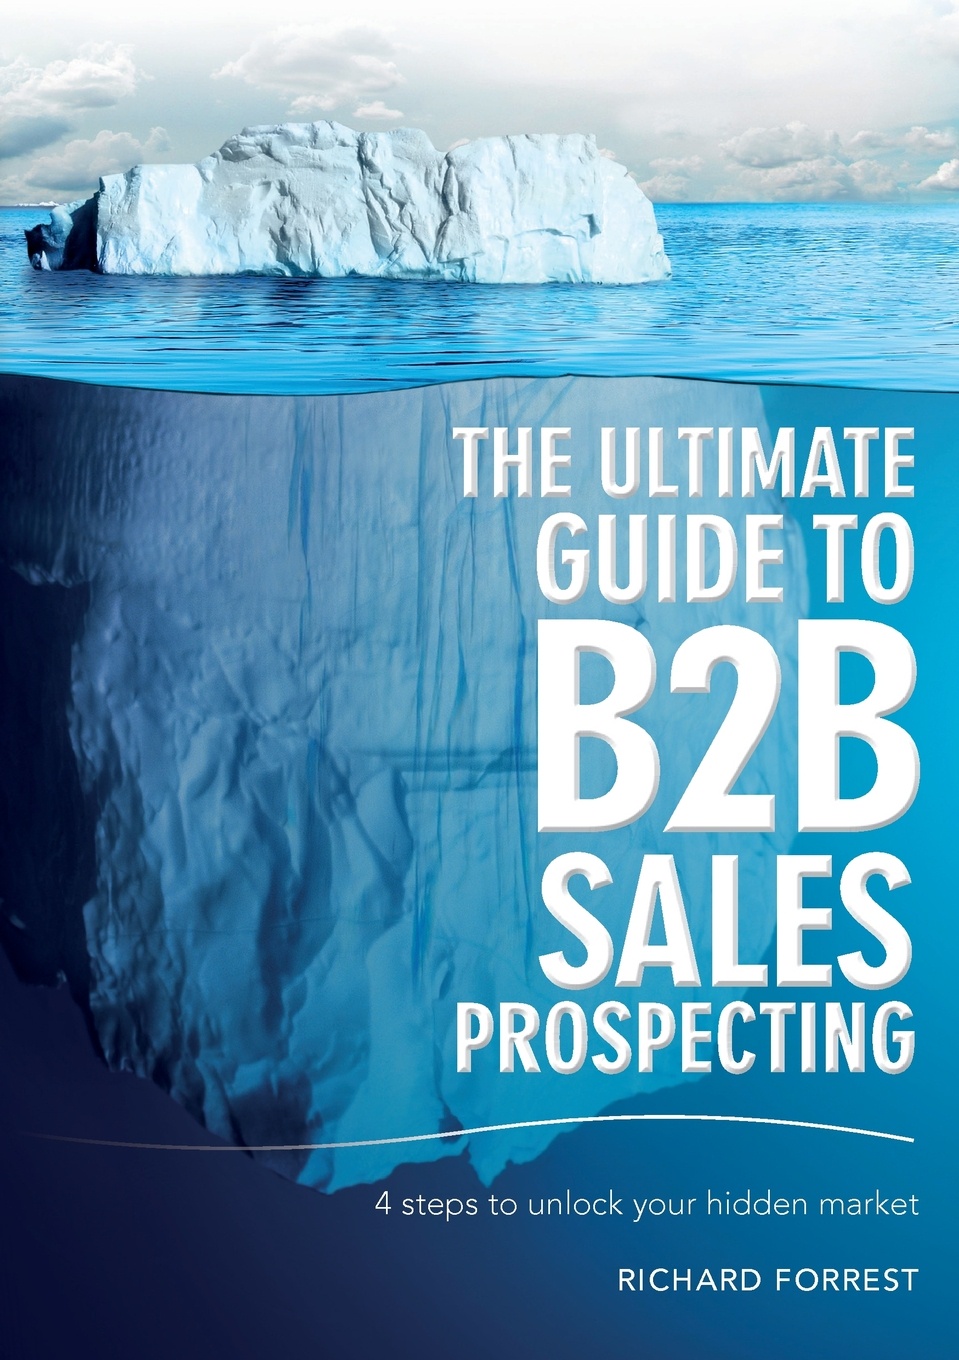 Hidden marketing. Sales Prospecting. The Ultimate Guide great Discovery.